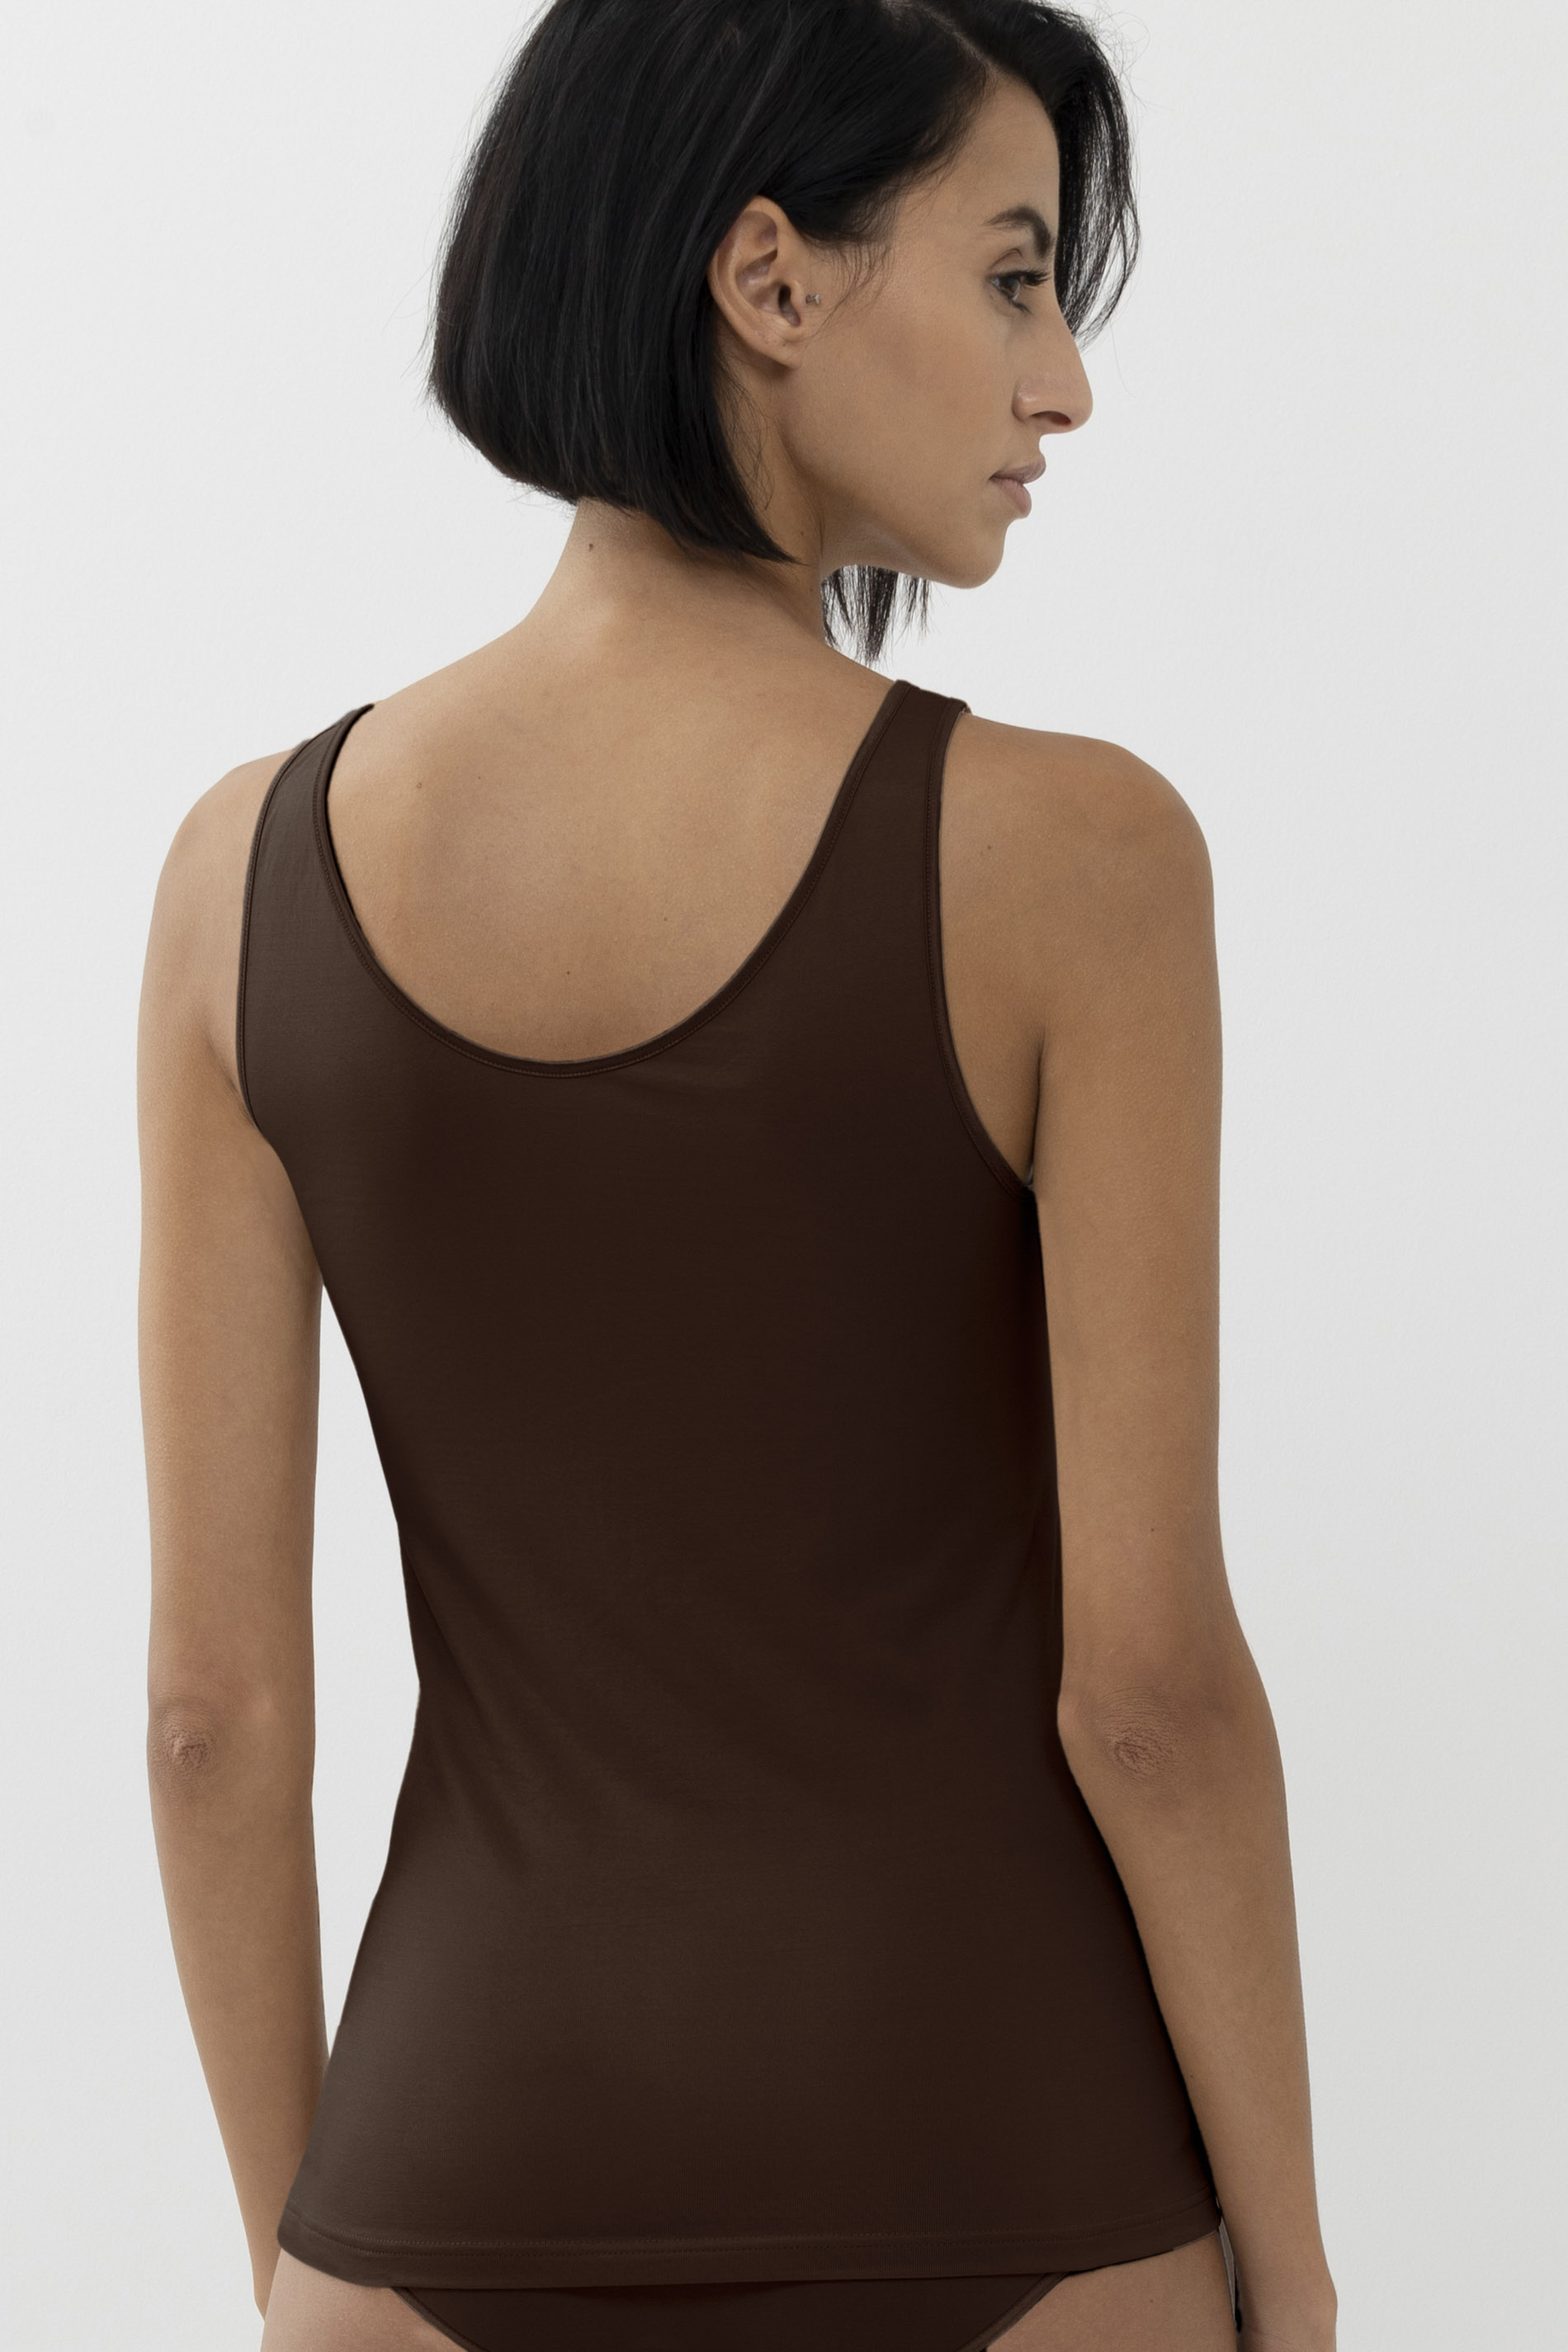 Top Liquorice Brown Serie Emotion Rear View | mey®